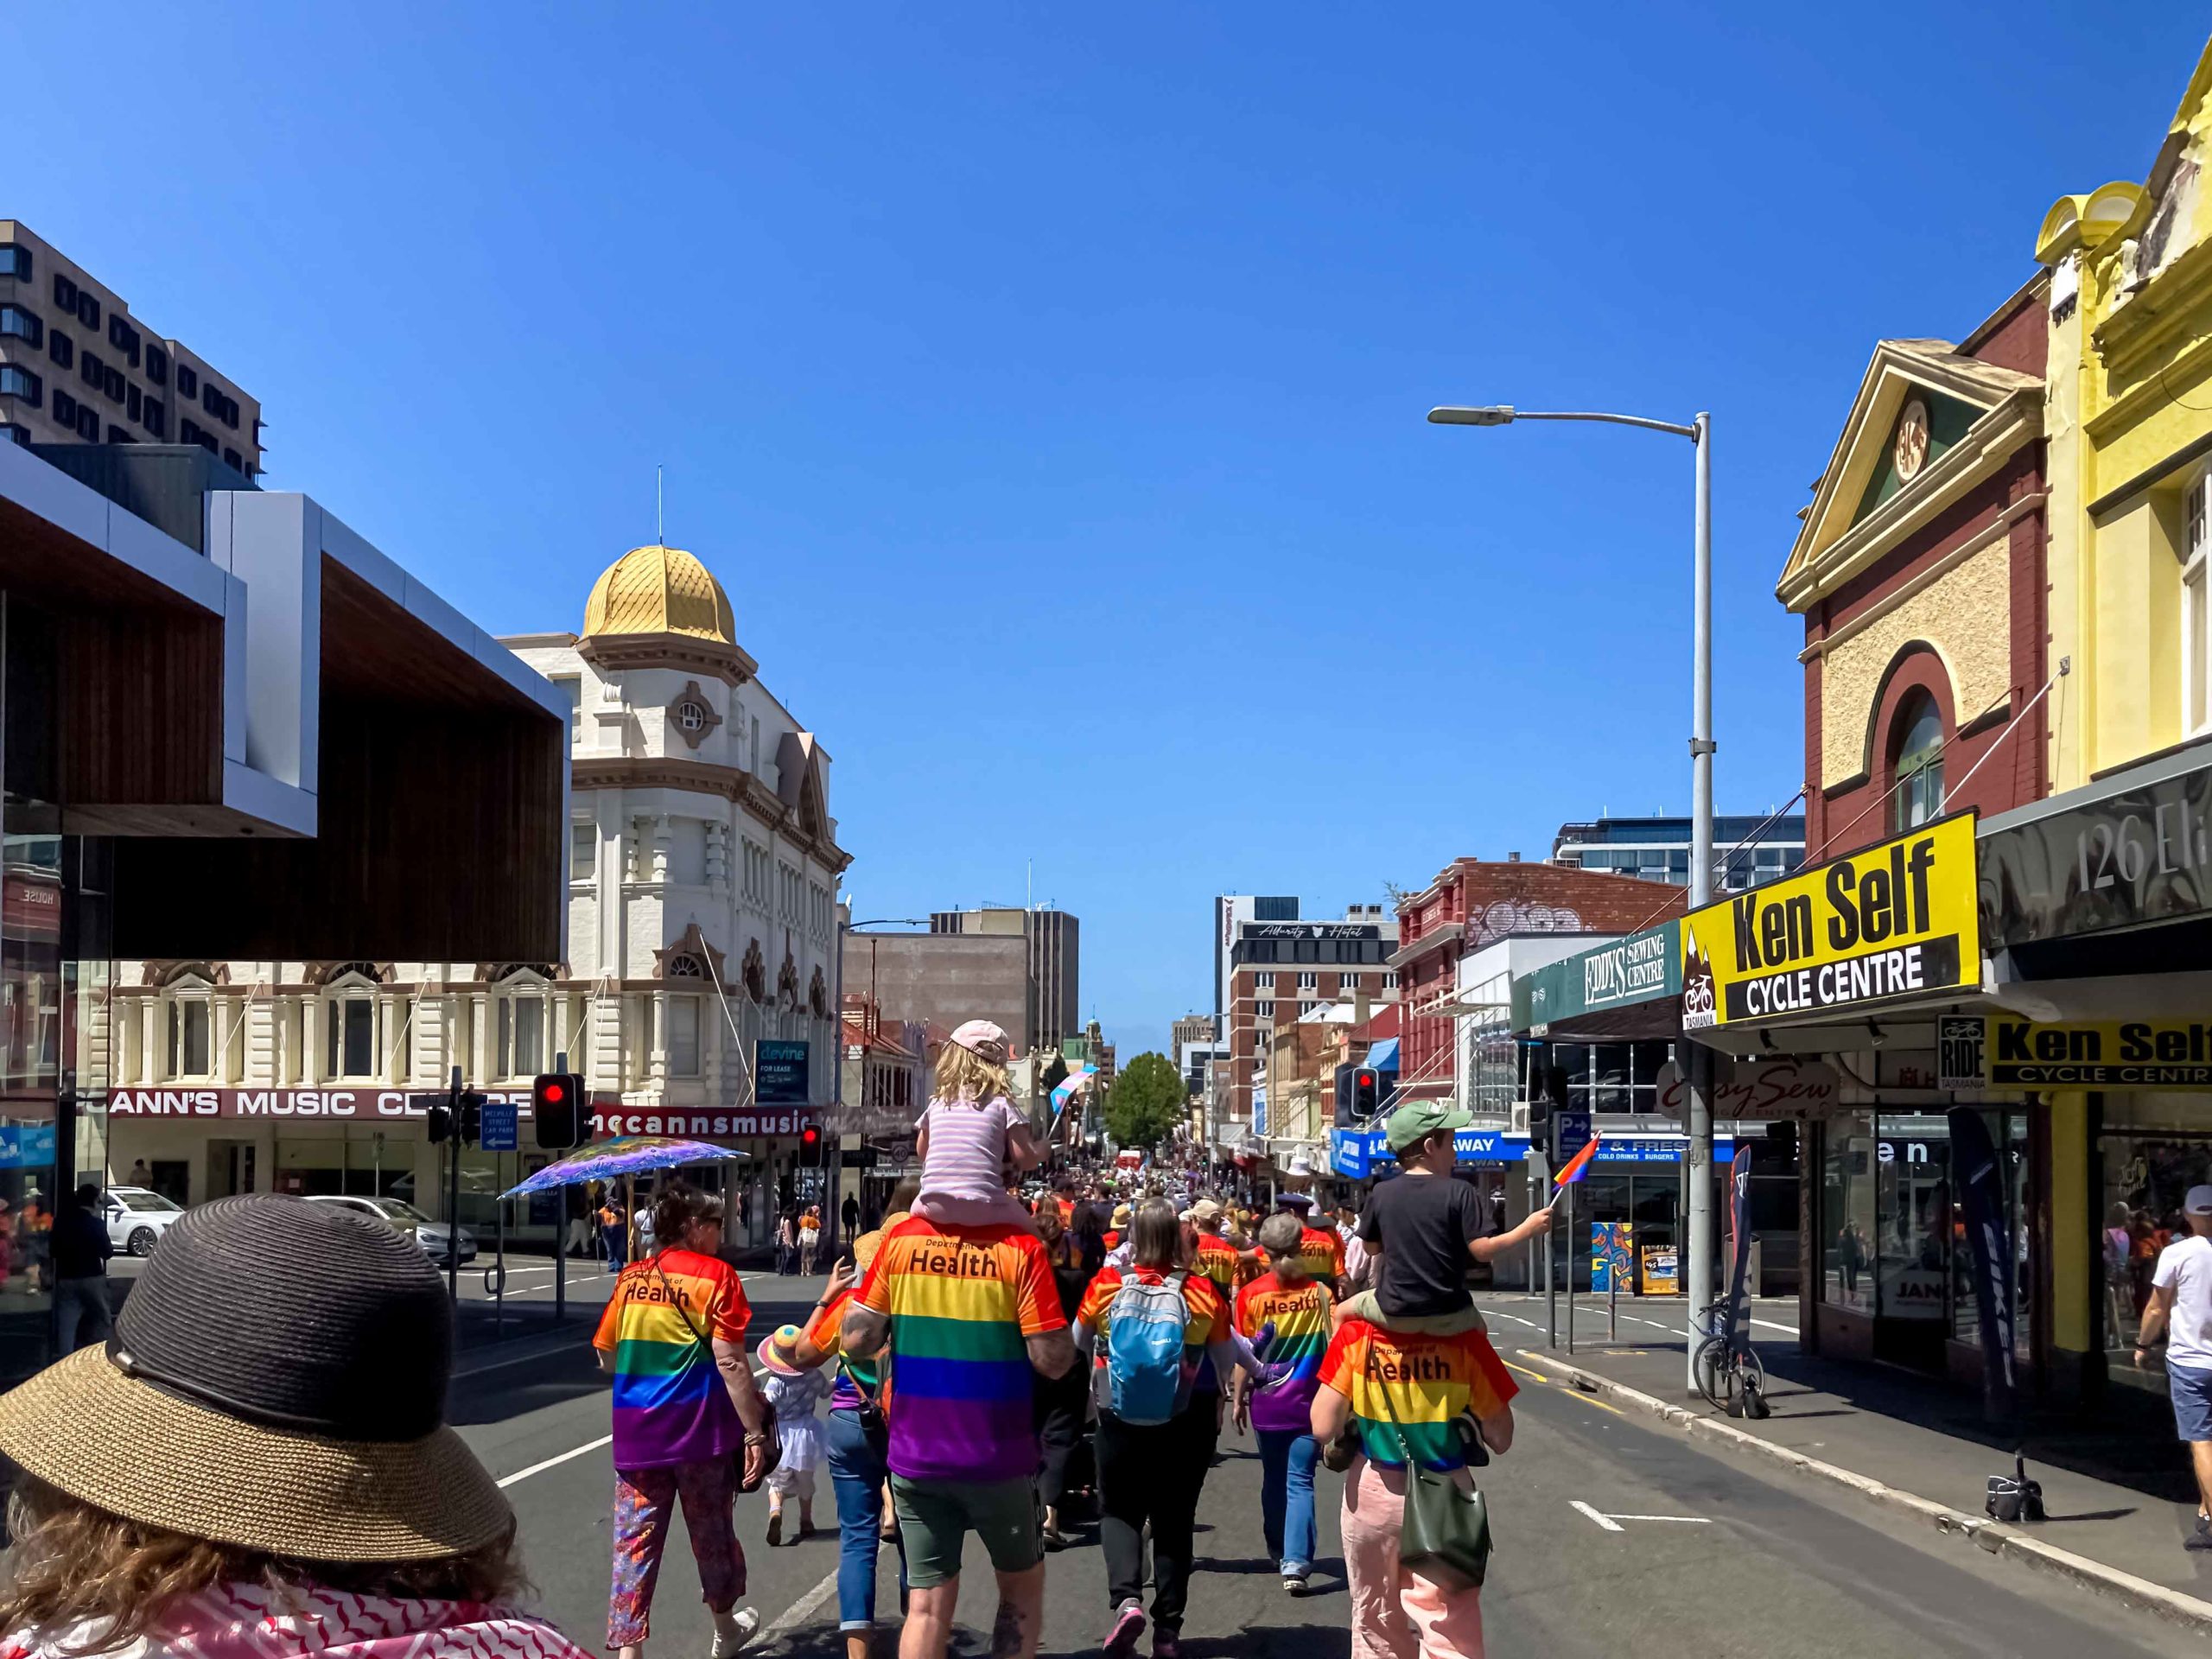 A back view of people wearing rainbow shirts walking through the city streets as part of a large parade